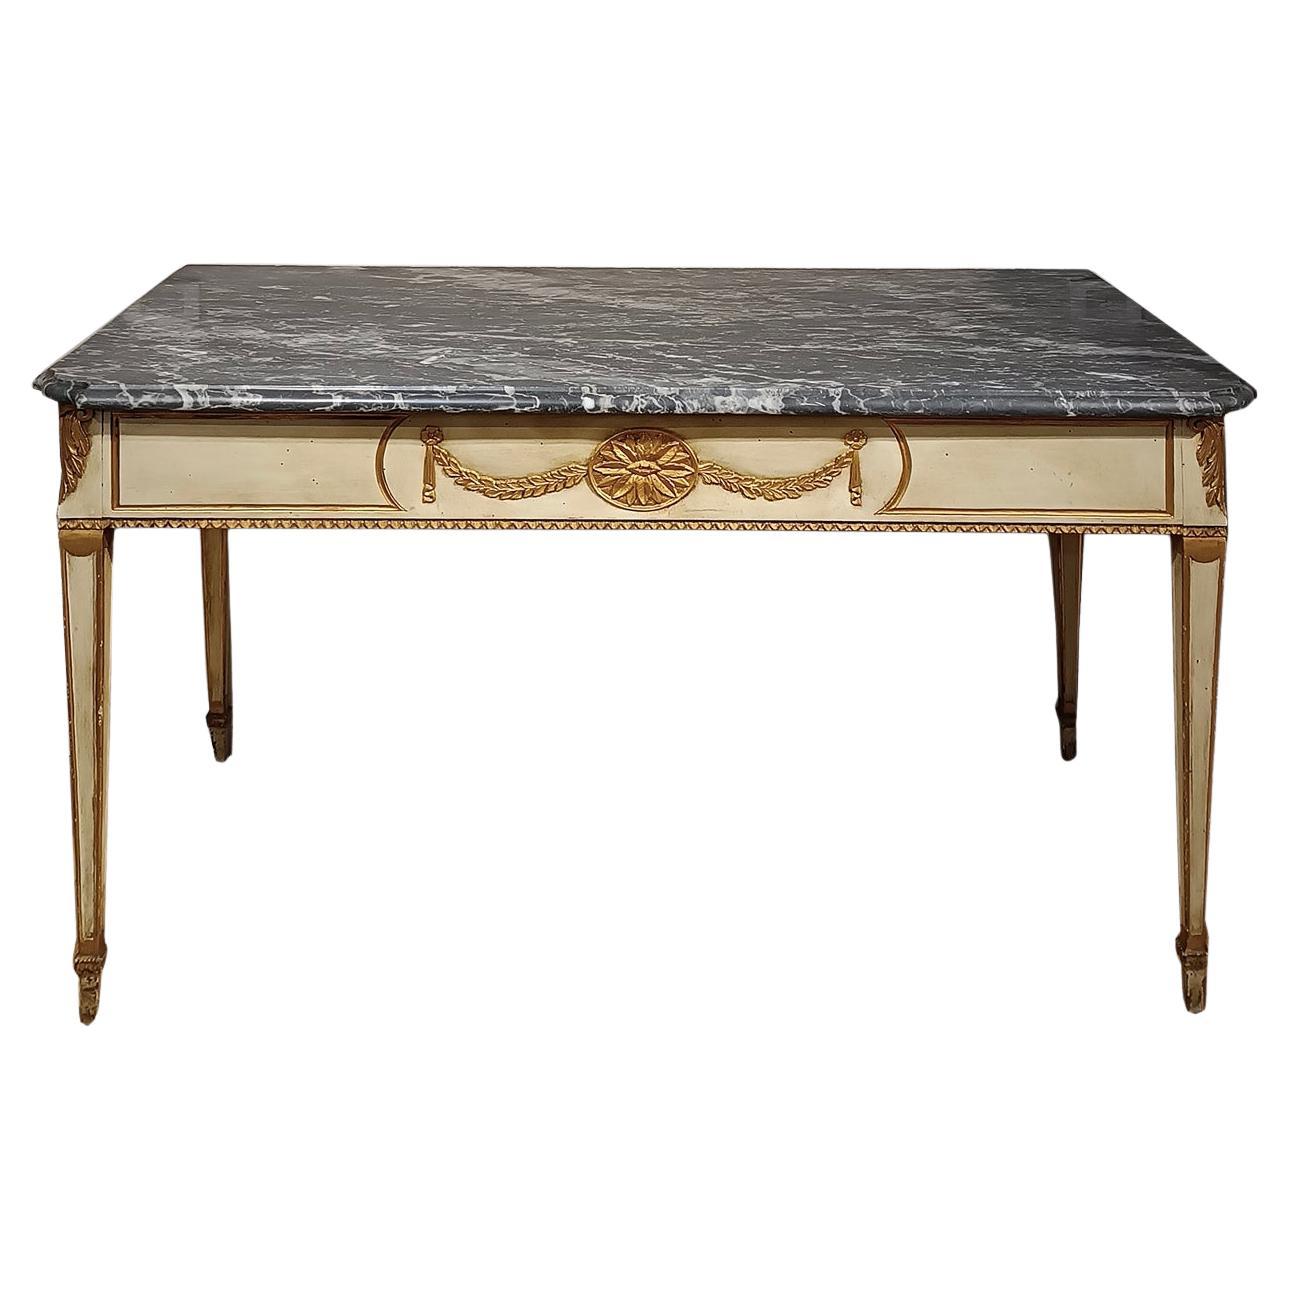 END OF THE 18th CENTURY NEOCLASSICAL CONSOLLE WITH GRAY BARDIGLIO MARBLE For Sale